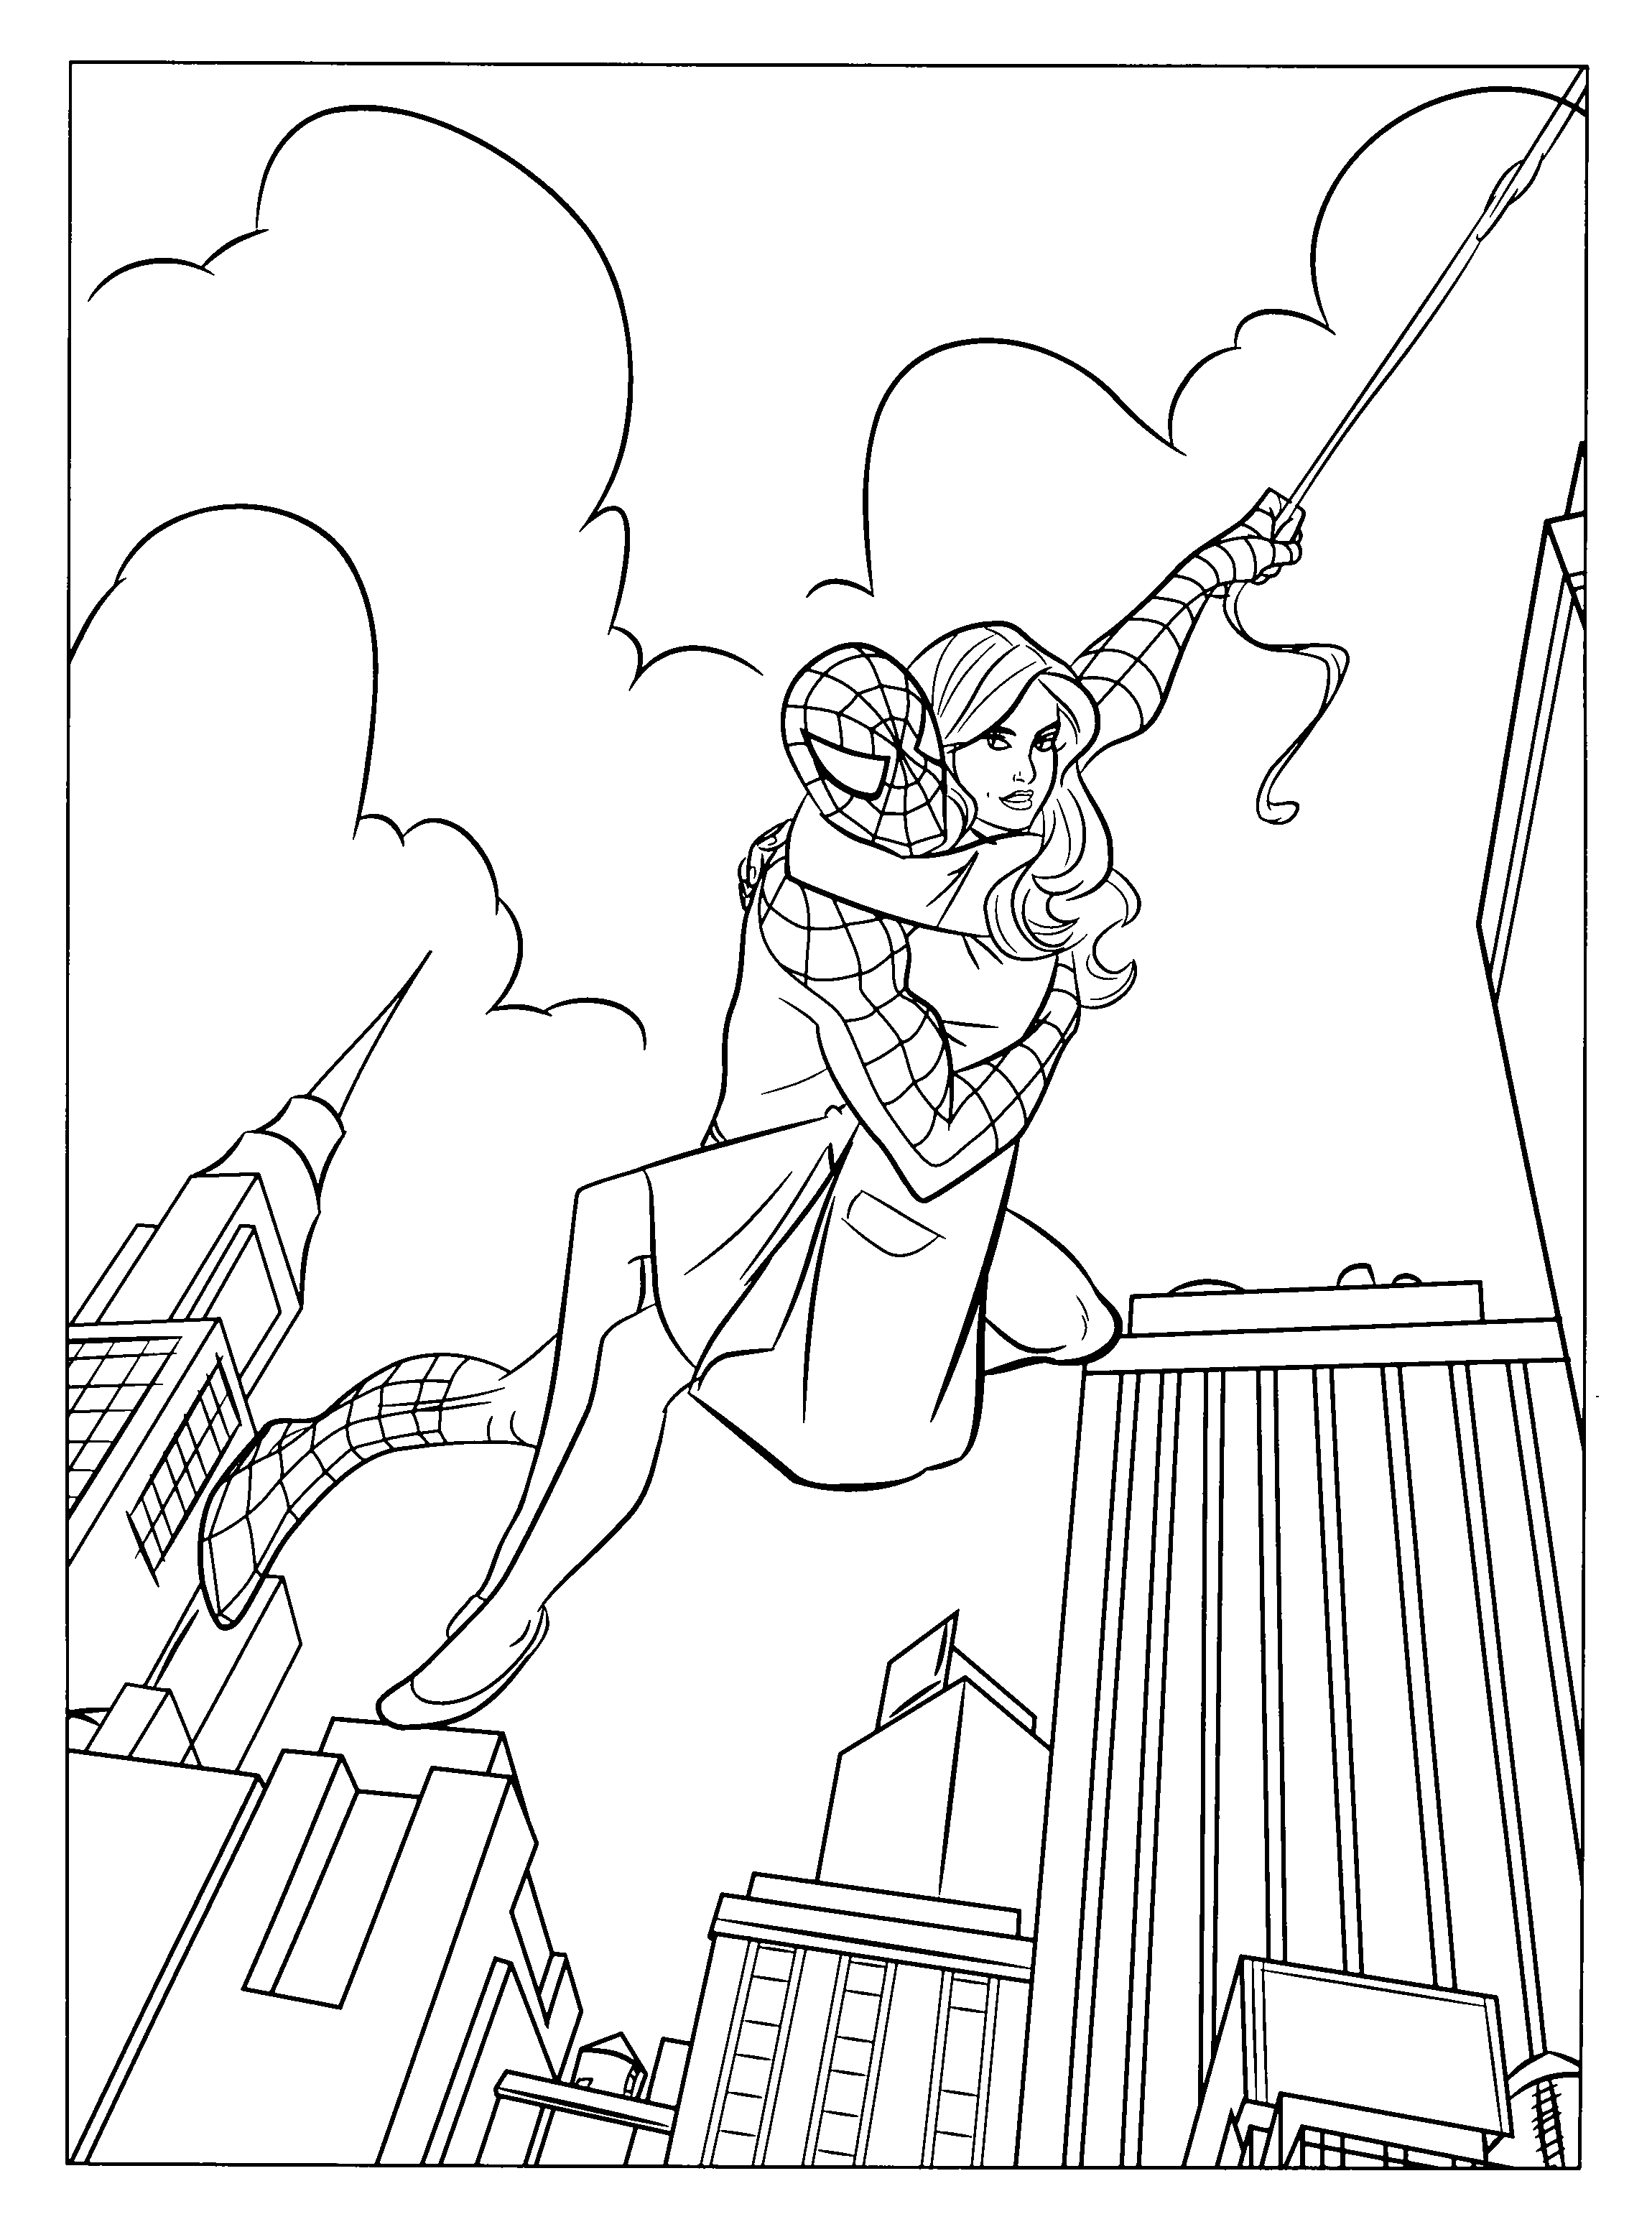 animated-coloring-pages-spider-man-image-0111